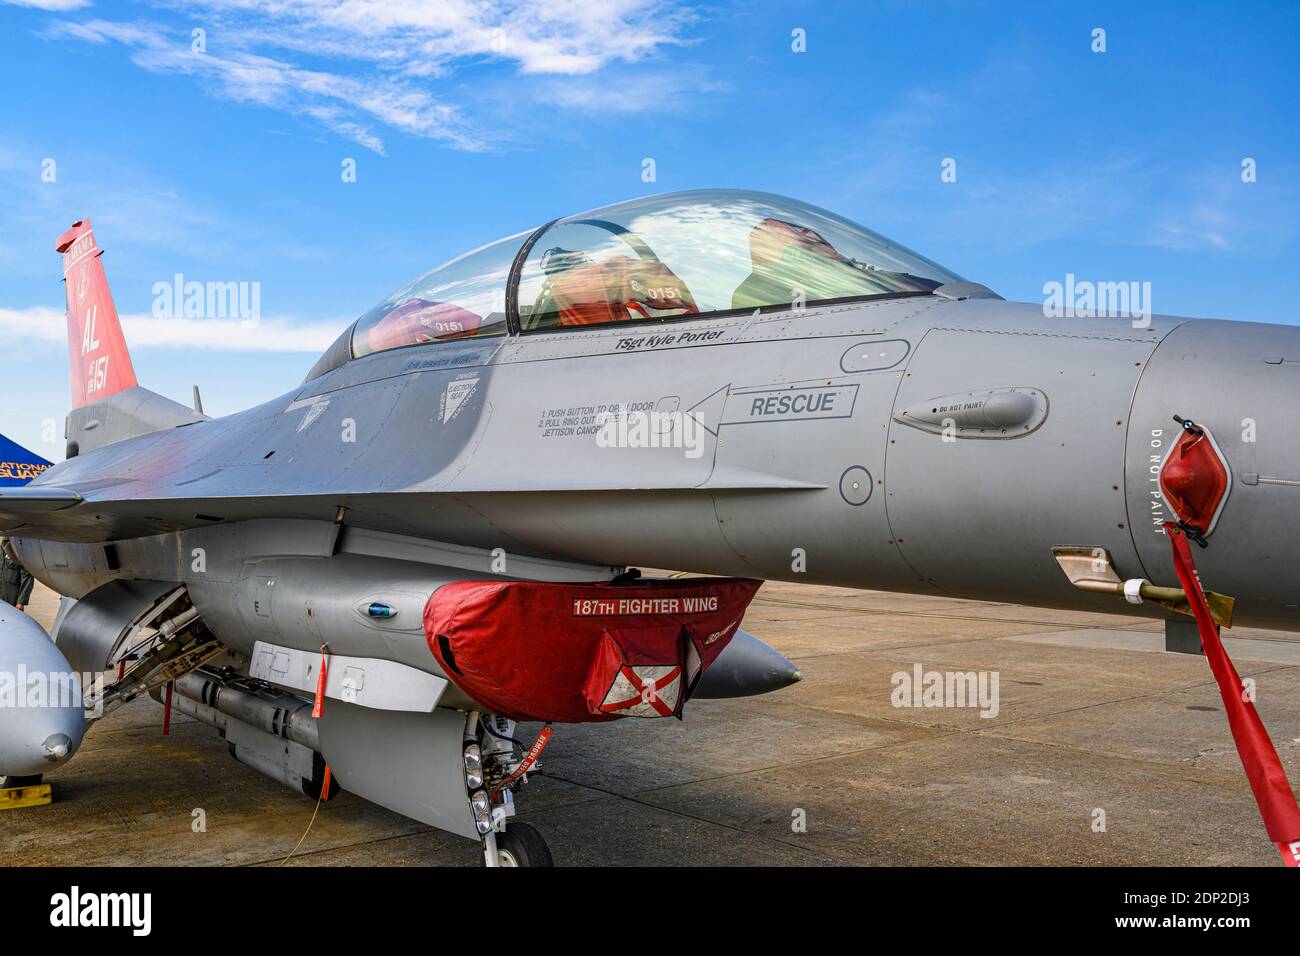 F-16 Fighting Falcon of the 187th Fighter Wing or Red Tails of the Alabama Air National Guard in Montgomery Alabama, USA. Stock Photo